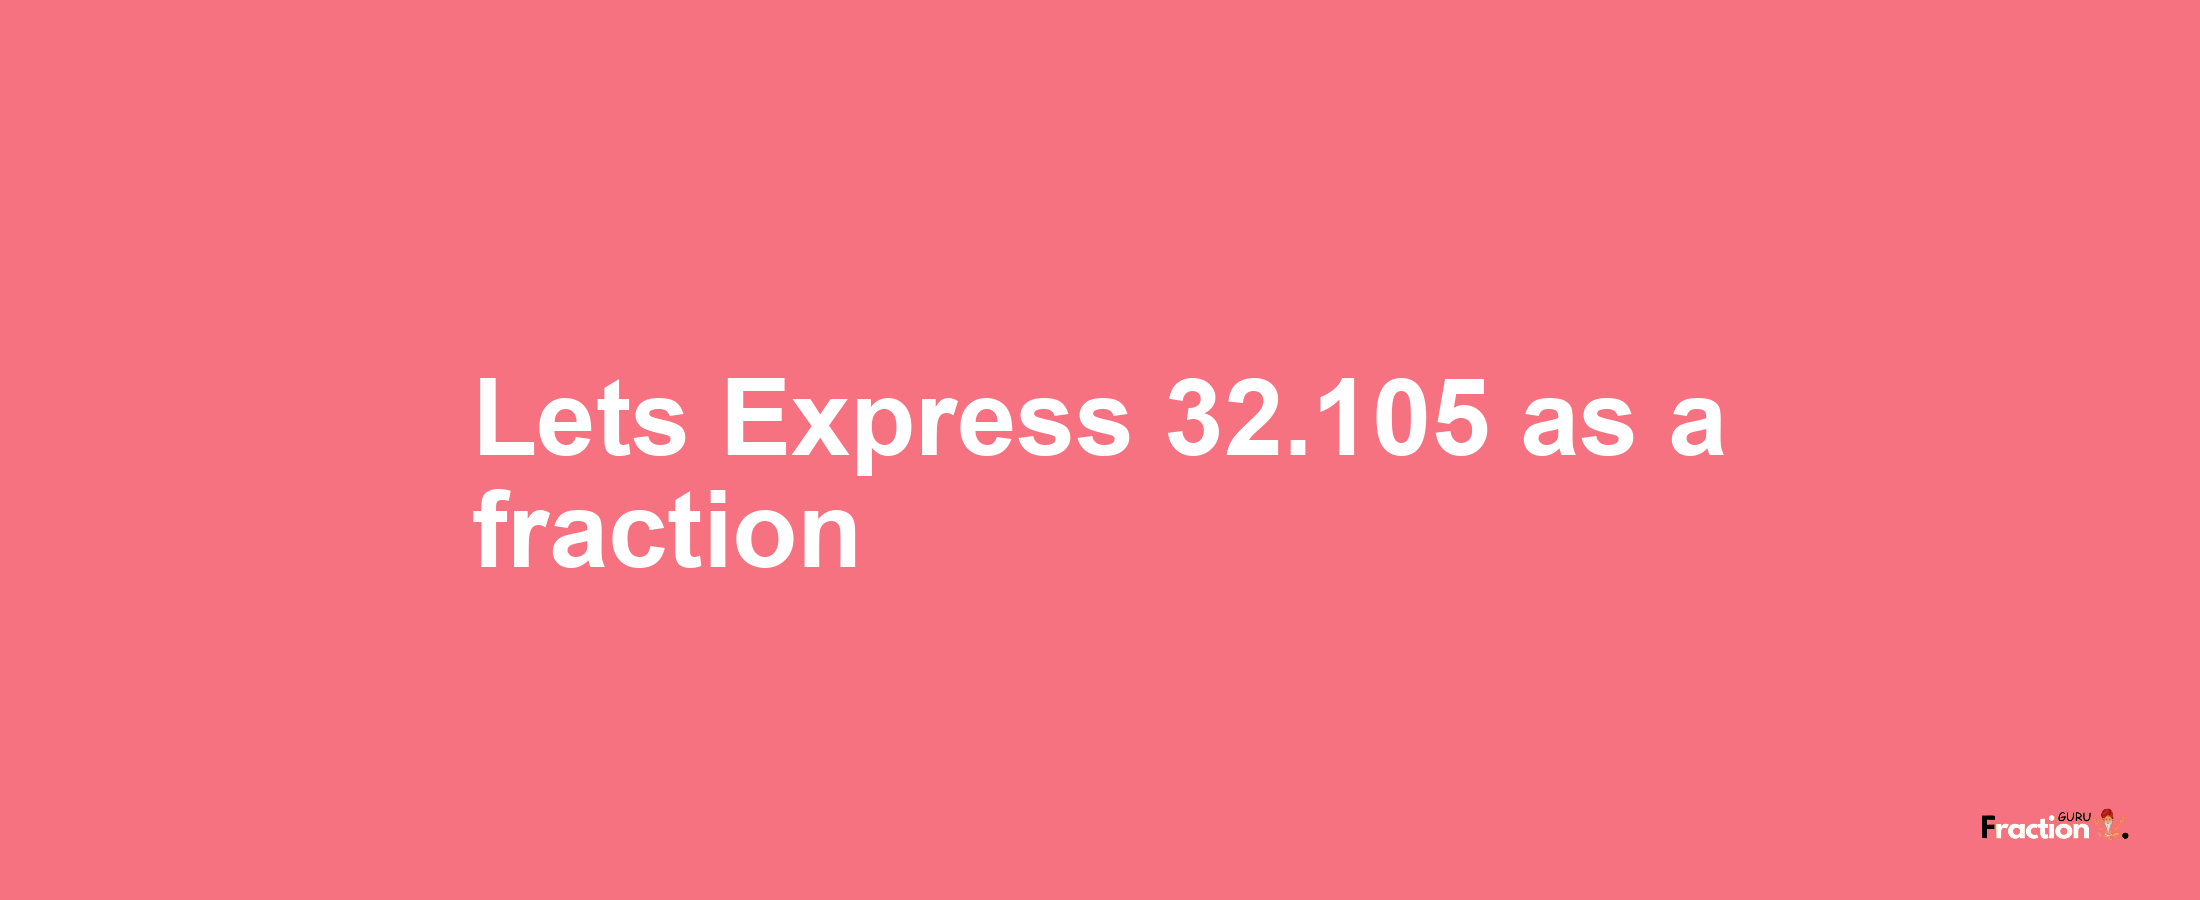 Lets Express 32.105 as afraction